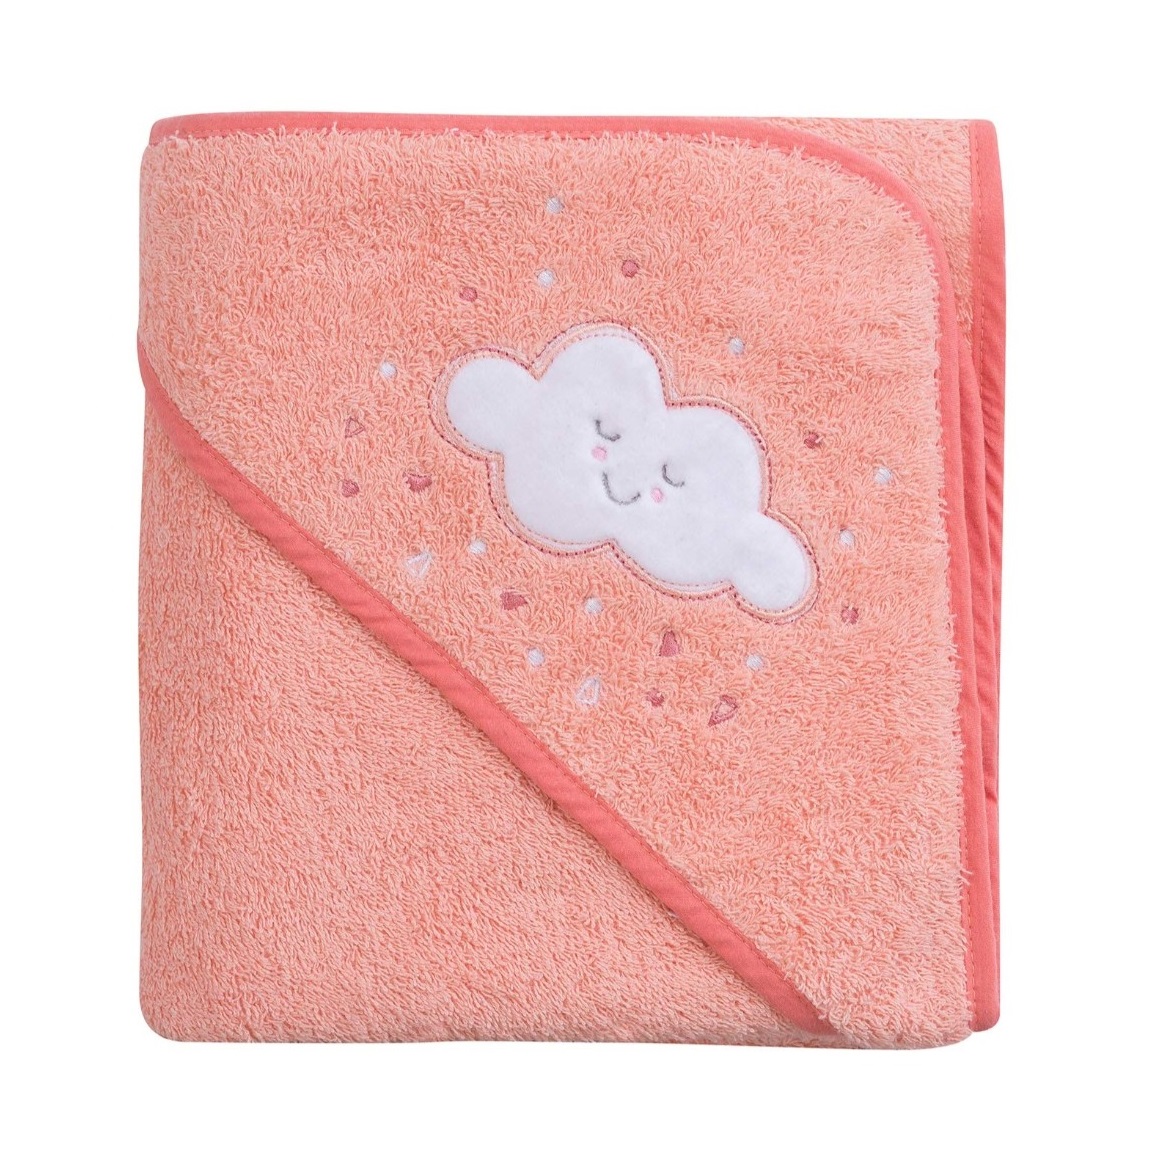 Clevamama Cotton Hooded Baby Bath Towel (Asst Colors!!) BUY 1 GET 1 FREE!!